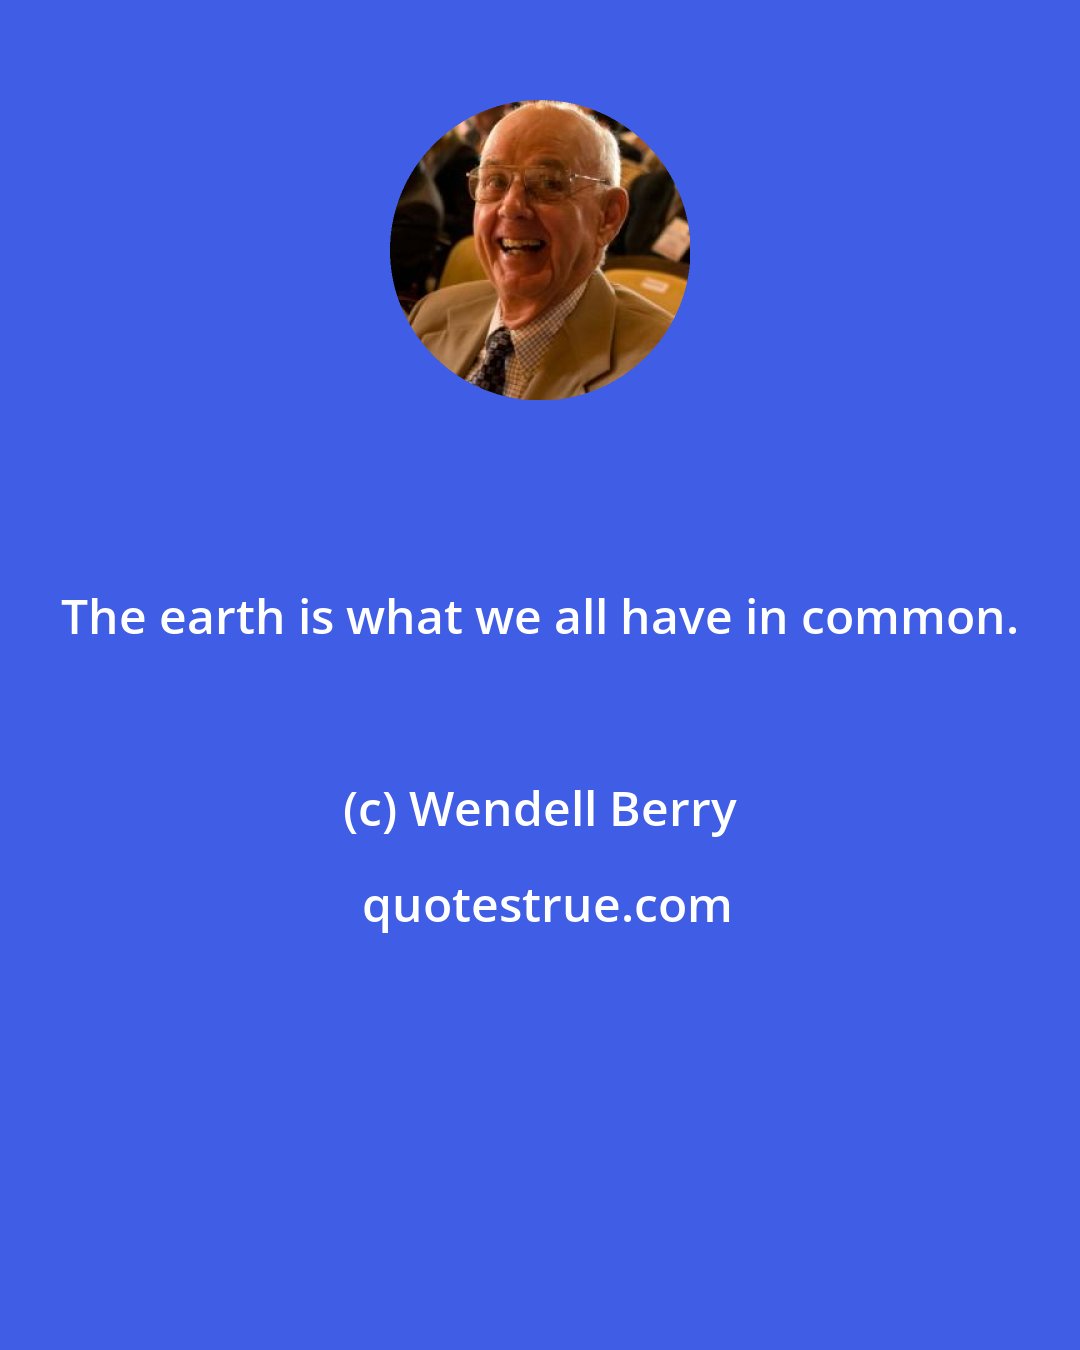 Wendell Berry: The earth is what we all have in common.